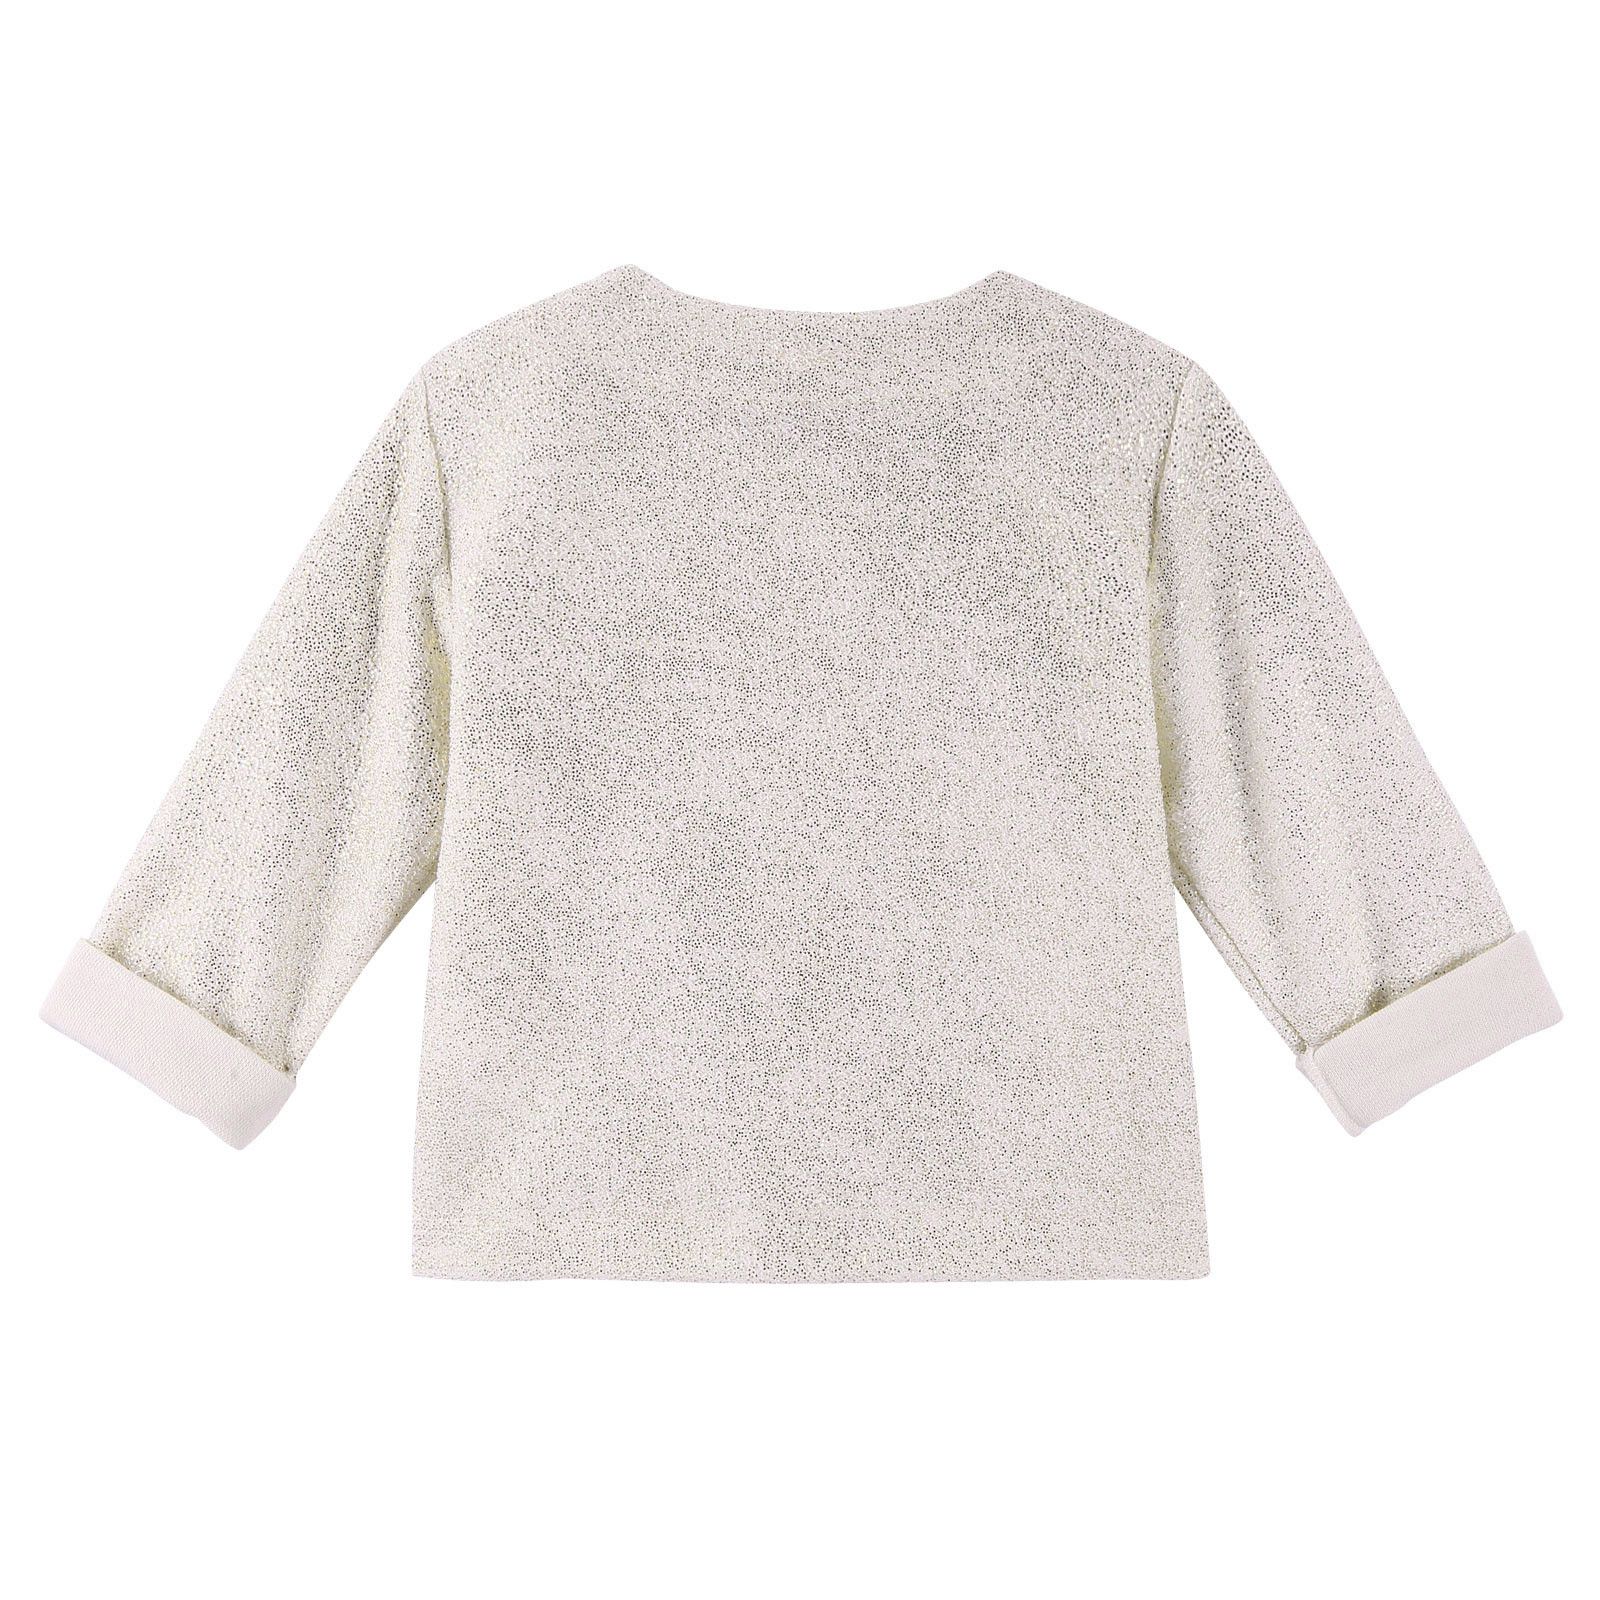 Girls White&Gold Particle Blouse With Bow Trims - CÉMAROSE | Children's Fashion Store - 2